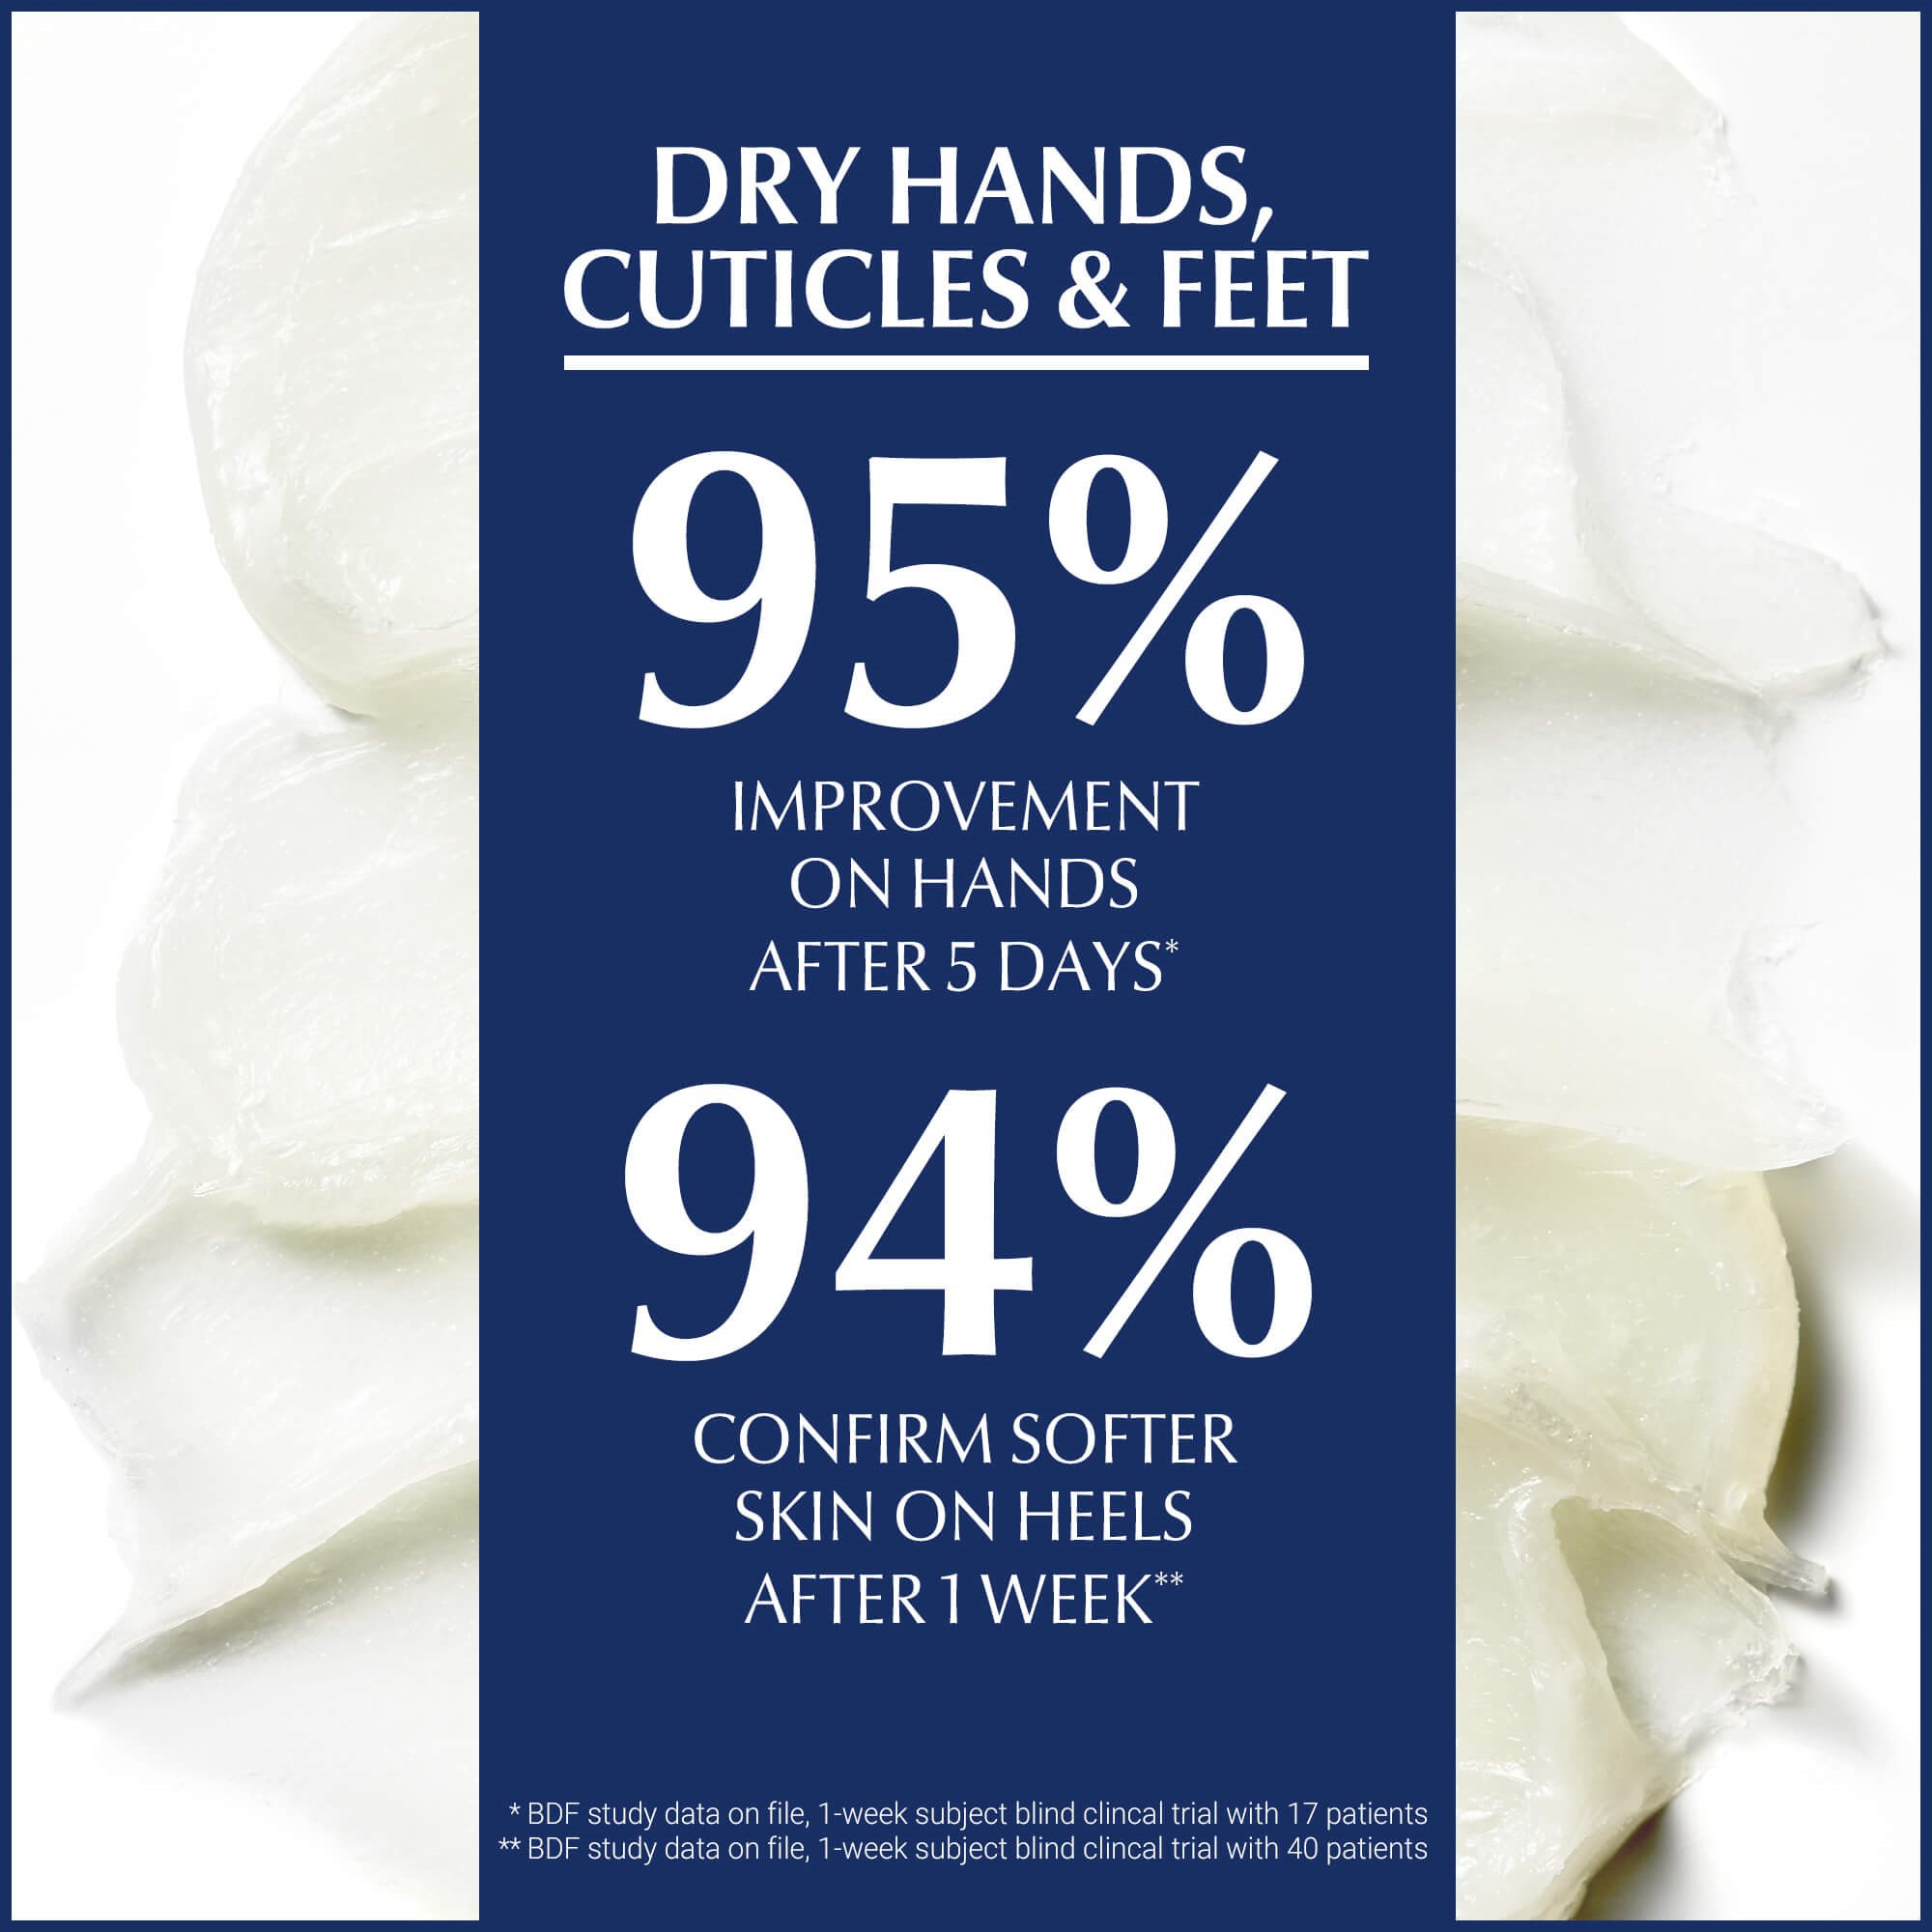 Image that reads “Dry hands, cuticles and feet –95% improvement on hands after 5 days”, “94% confirm softer skin on heels after 1 week”